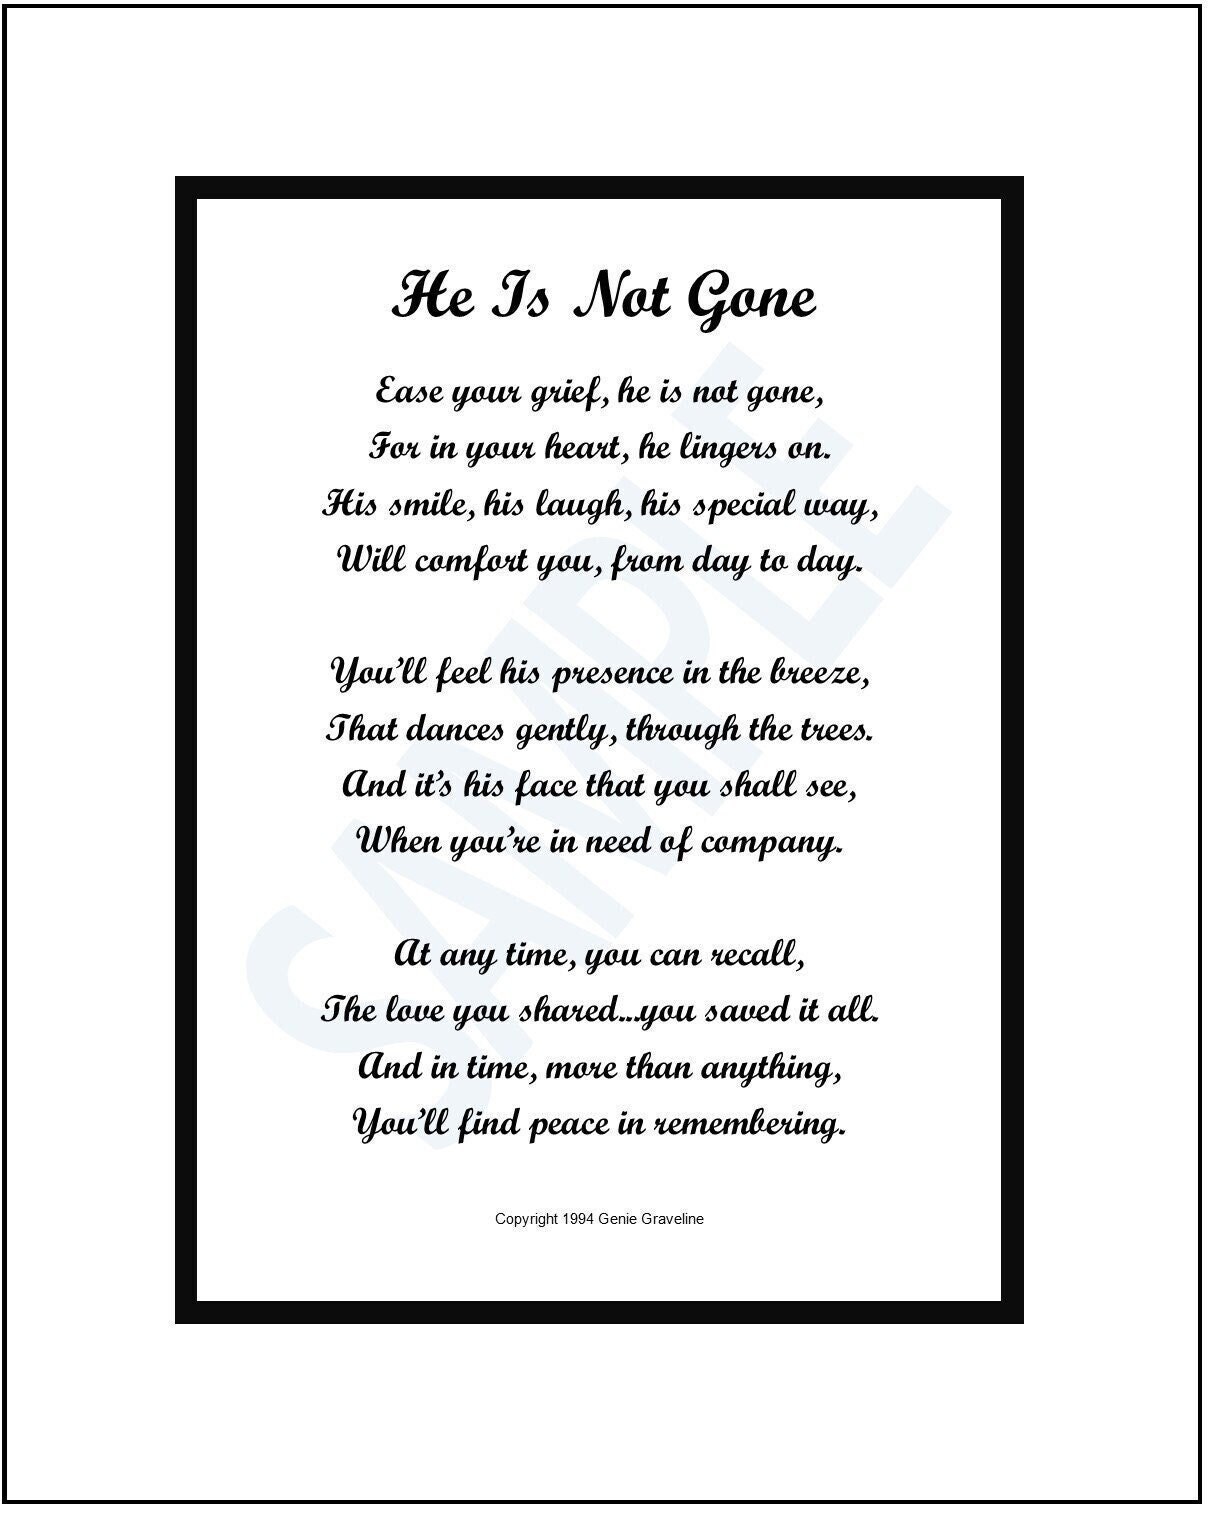 Sympathy Gift Grief David Harkins Bereavement Mourning He is Gone Poem INSTANT DOWNLOAD Print Quote Funeral